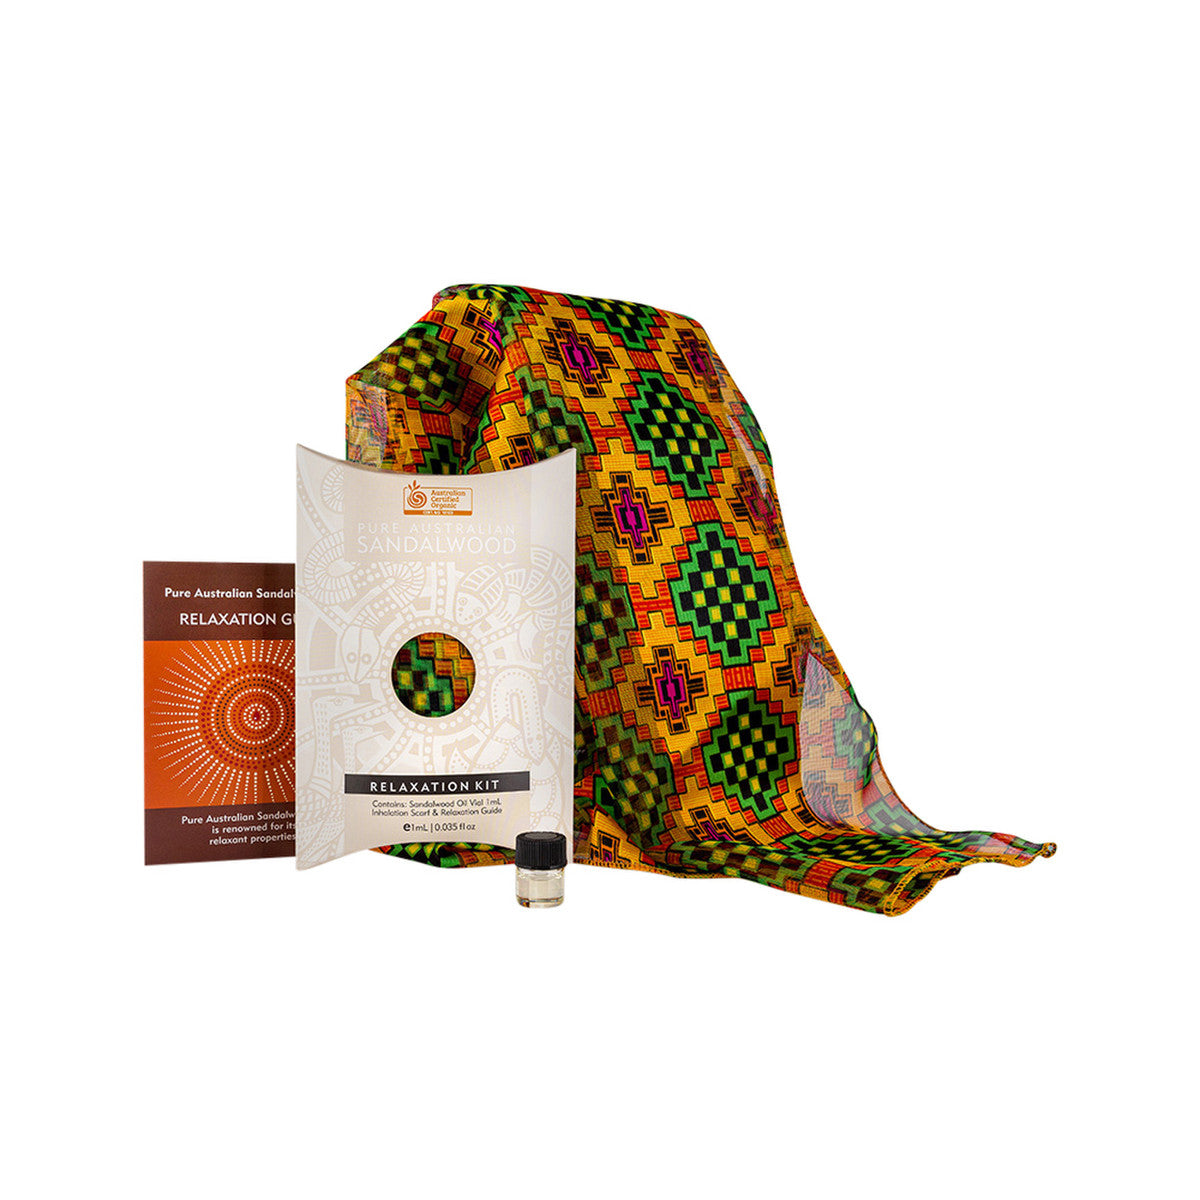 Mount Romance Pure Australian Sandalwood Relaxation Kit (contains: Sandalwood Vial 1ml, Inhalation Scarf & Relaxation Guide)